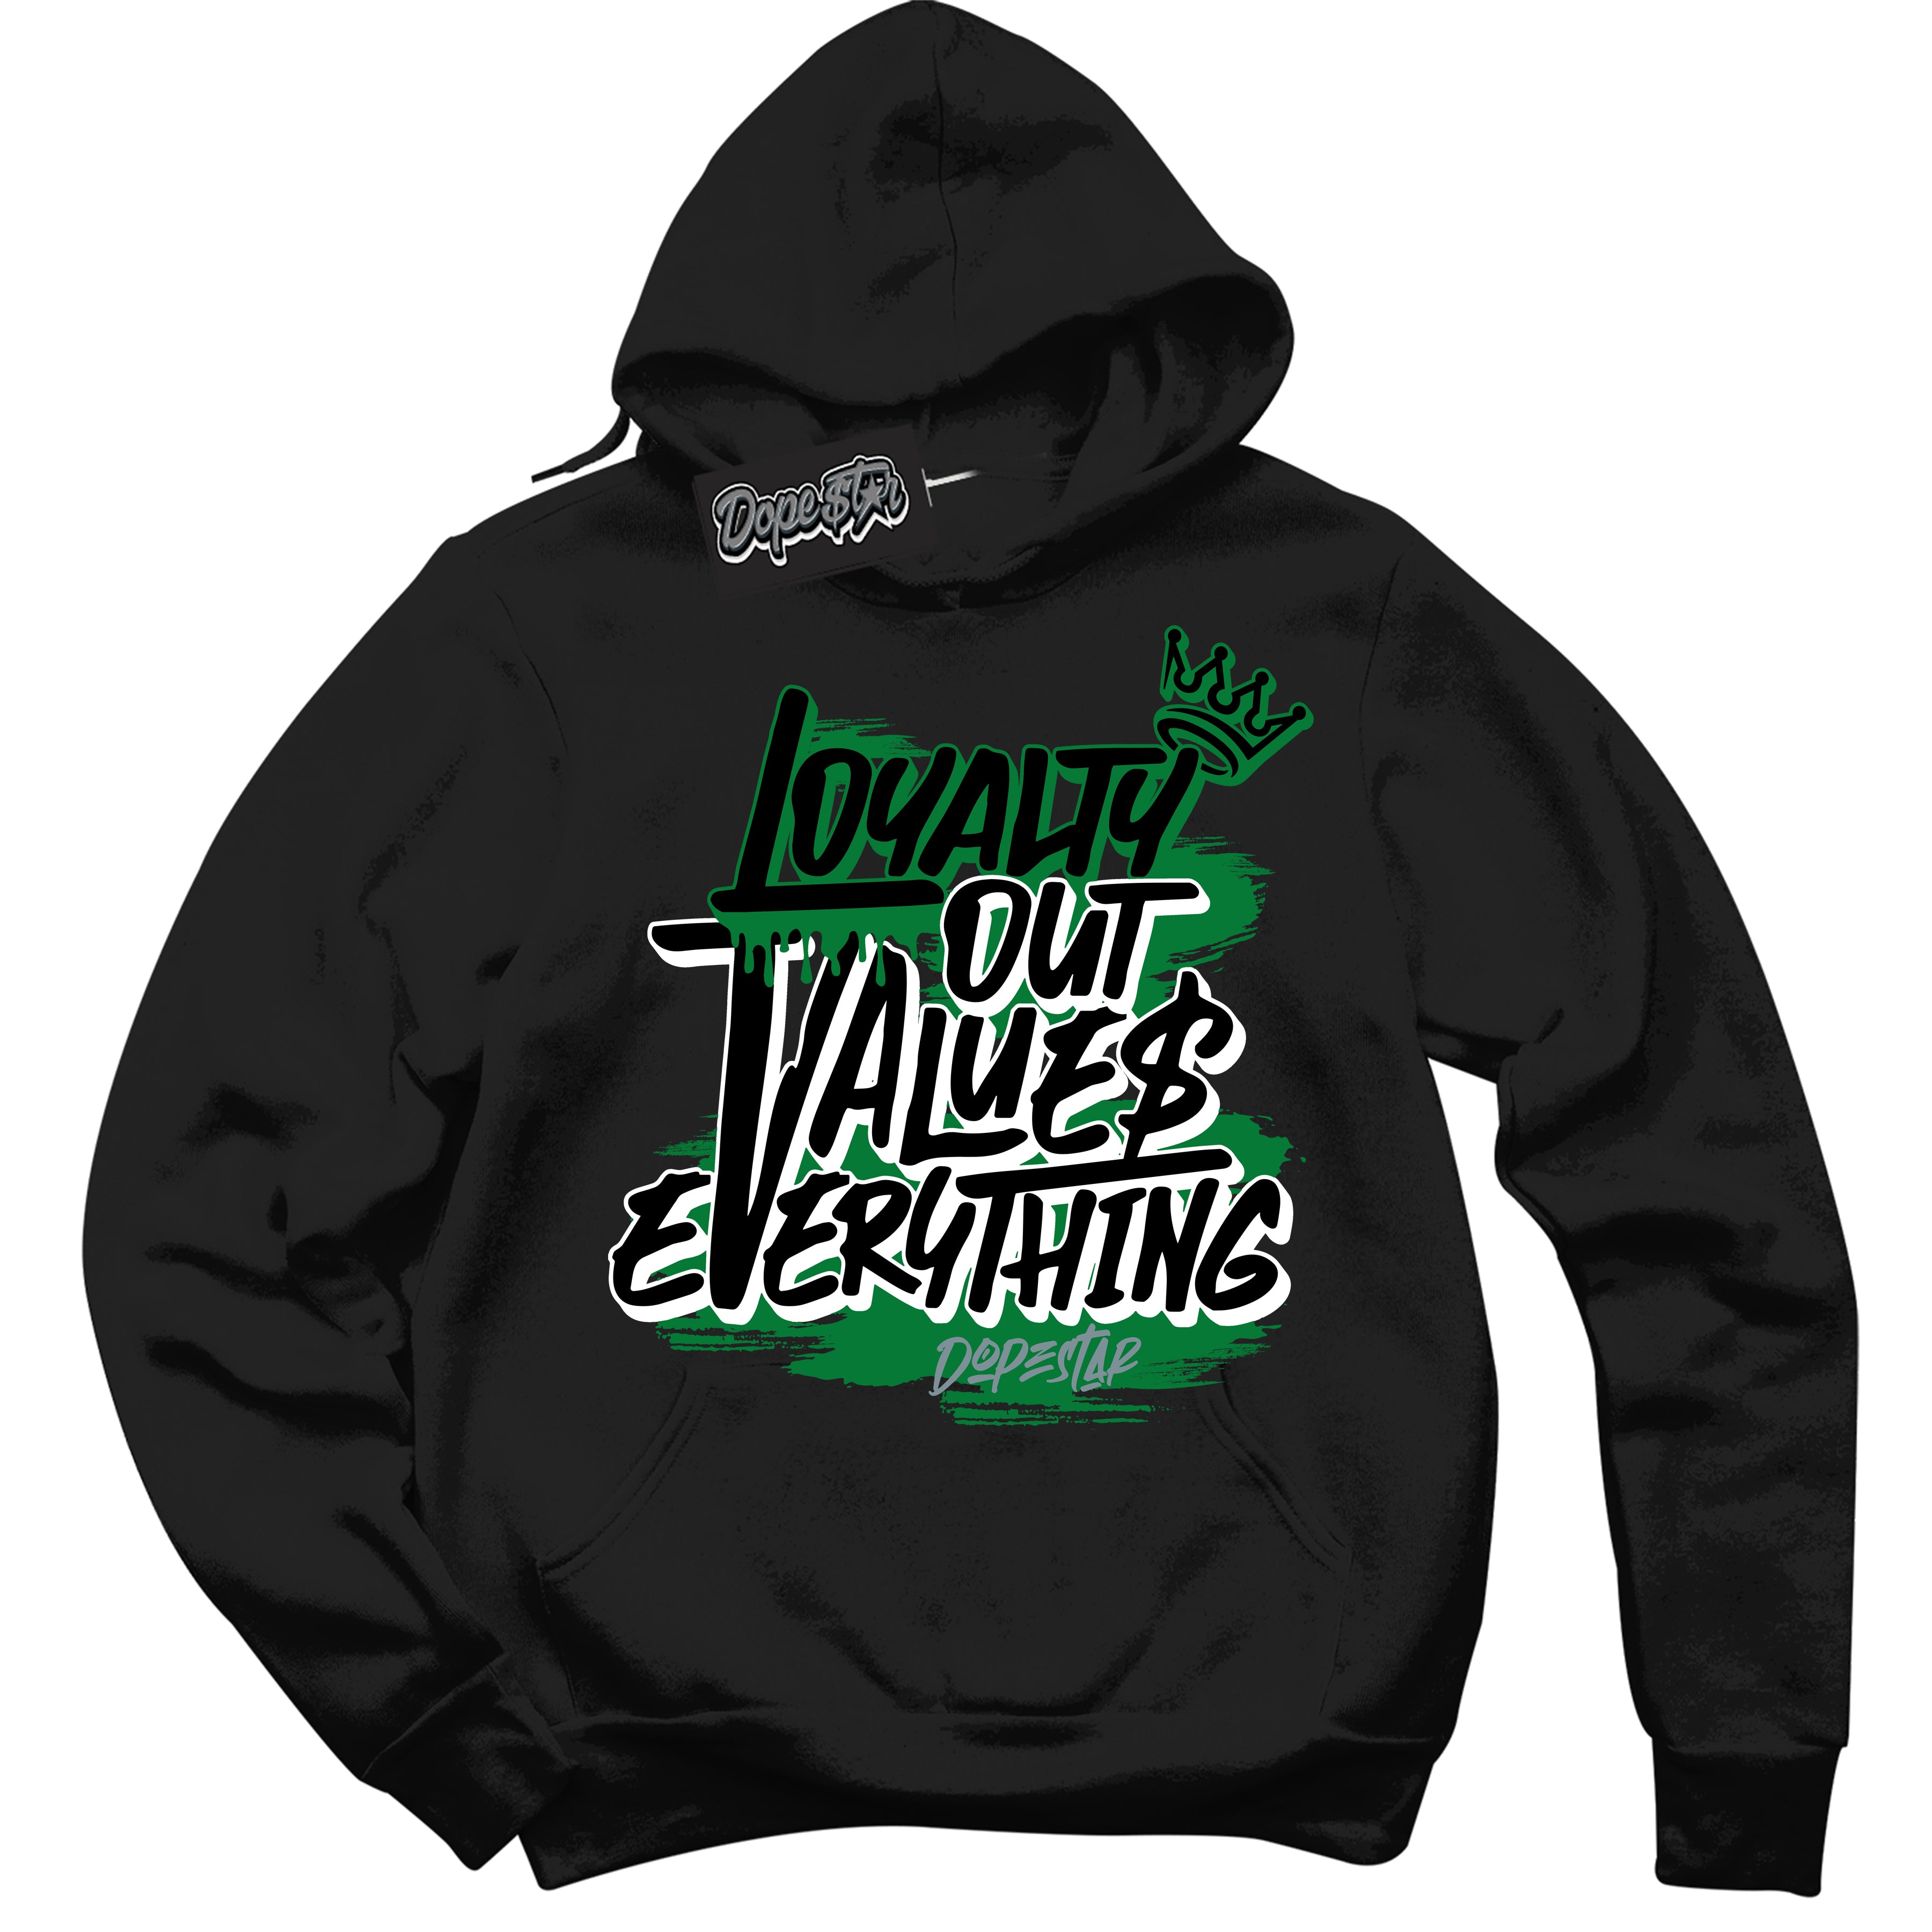 Cool Black Hoodie with “ Loyalty Out Values Everything ”  design that Perfectly Matches  Lucky Green 5s Sneakers.